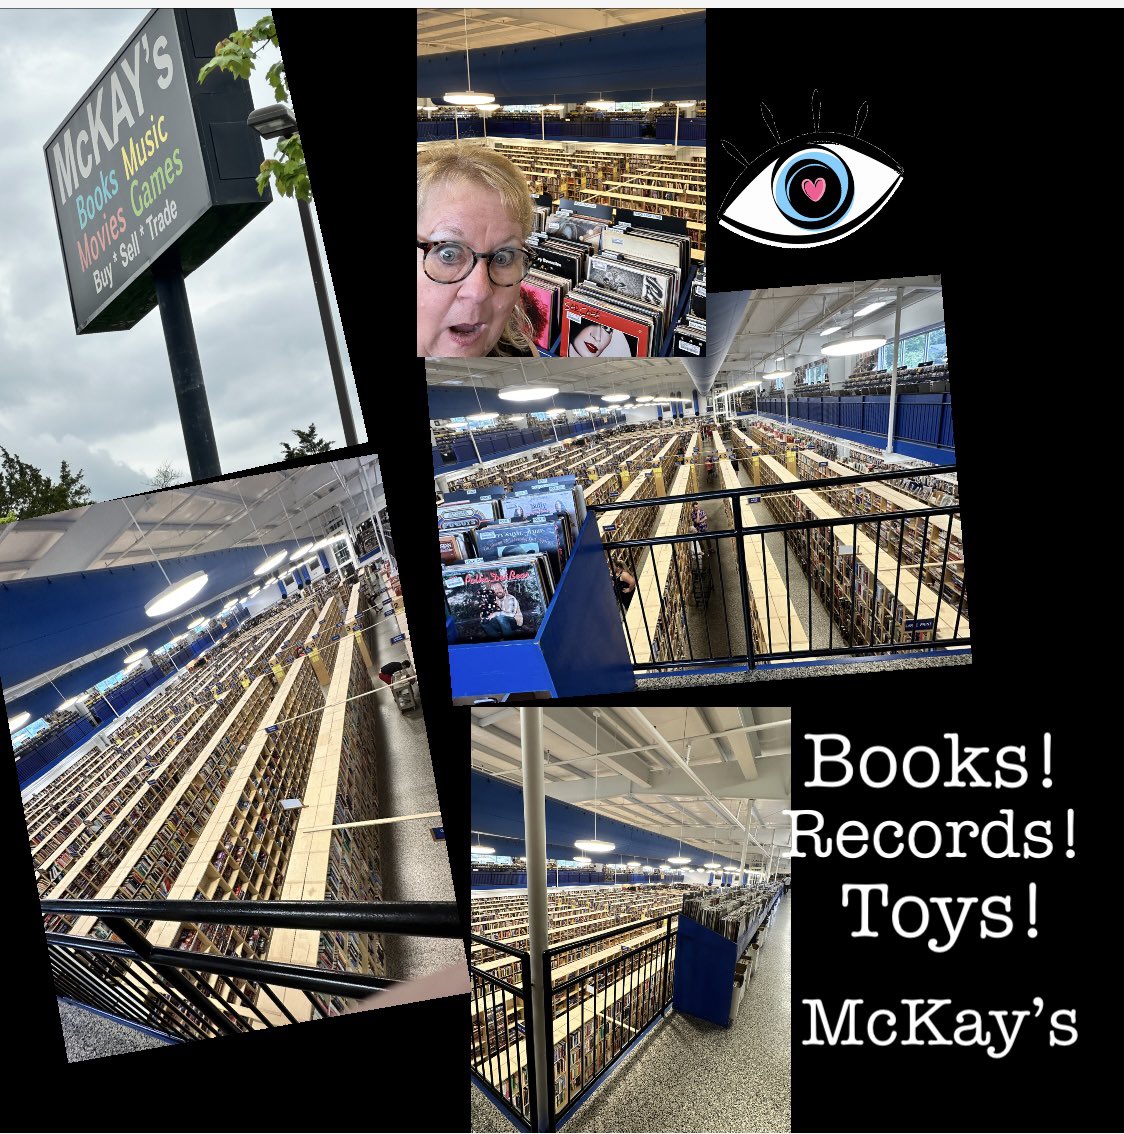 If you ever stop at McKays in Nashville -it’s mind-blowing …used books toys records …it’s so BIG! LakeGirlPublishing.com #books #bookstore #authorlife